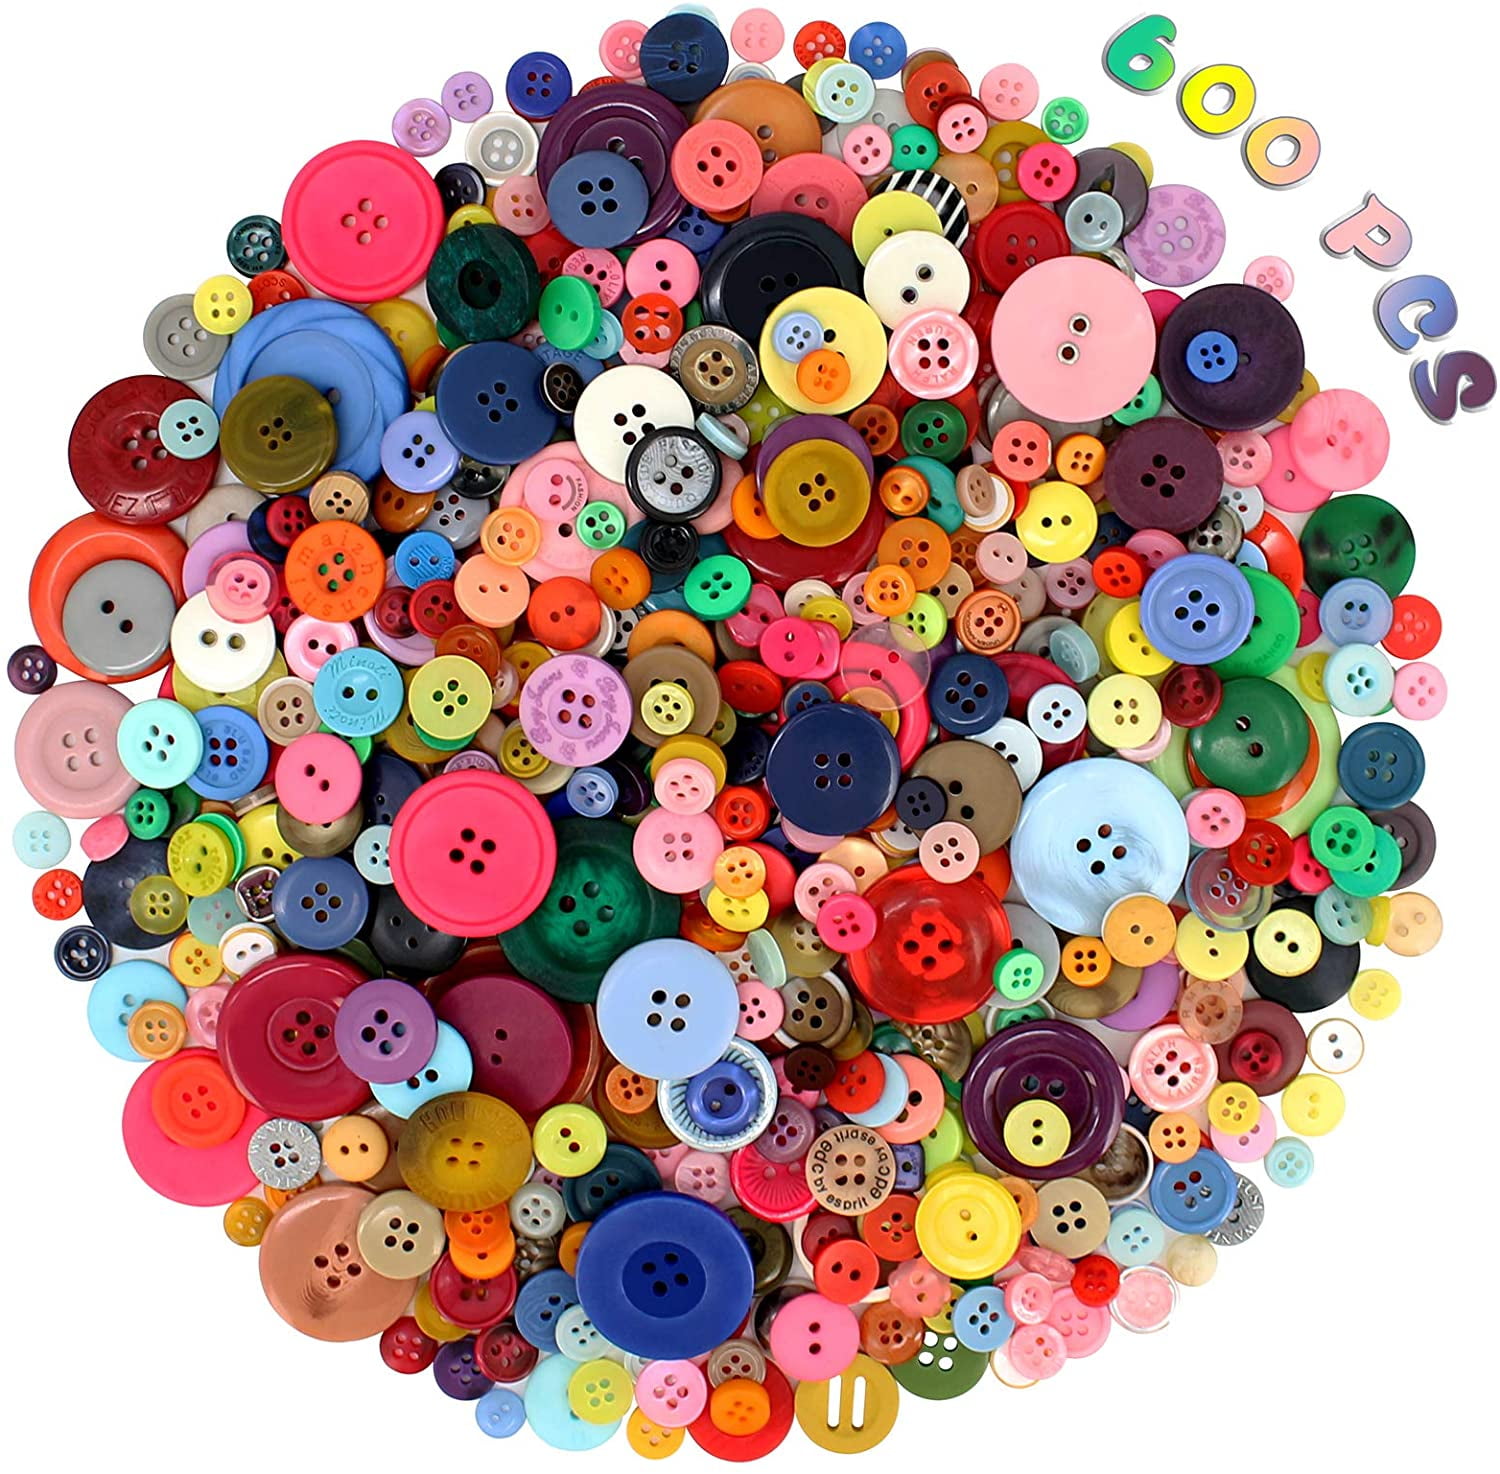 Greentime 1500 pcs Round Resin Buttons Mixed Color Assorted Sizes for  Crafts Sewing DIY Manual Button Painting DIY Handmade Ornament Buttons, 2  Holes